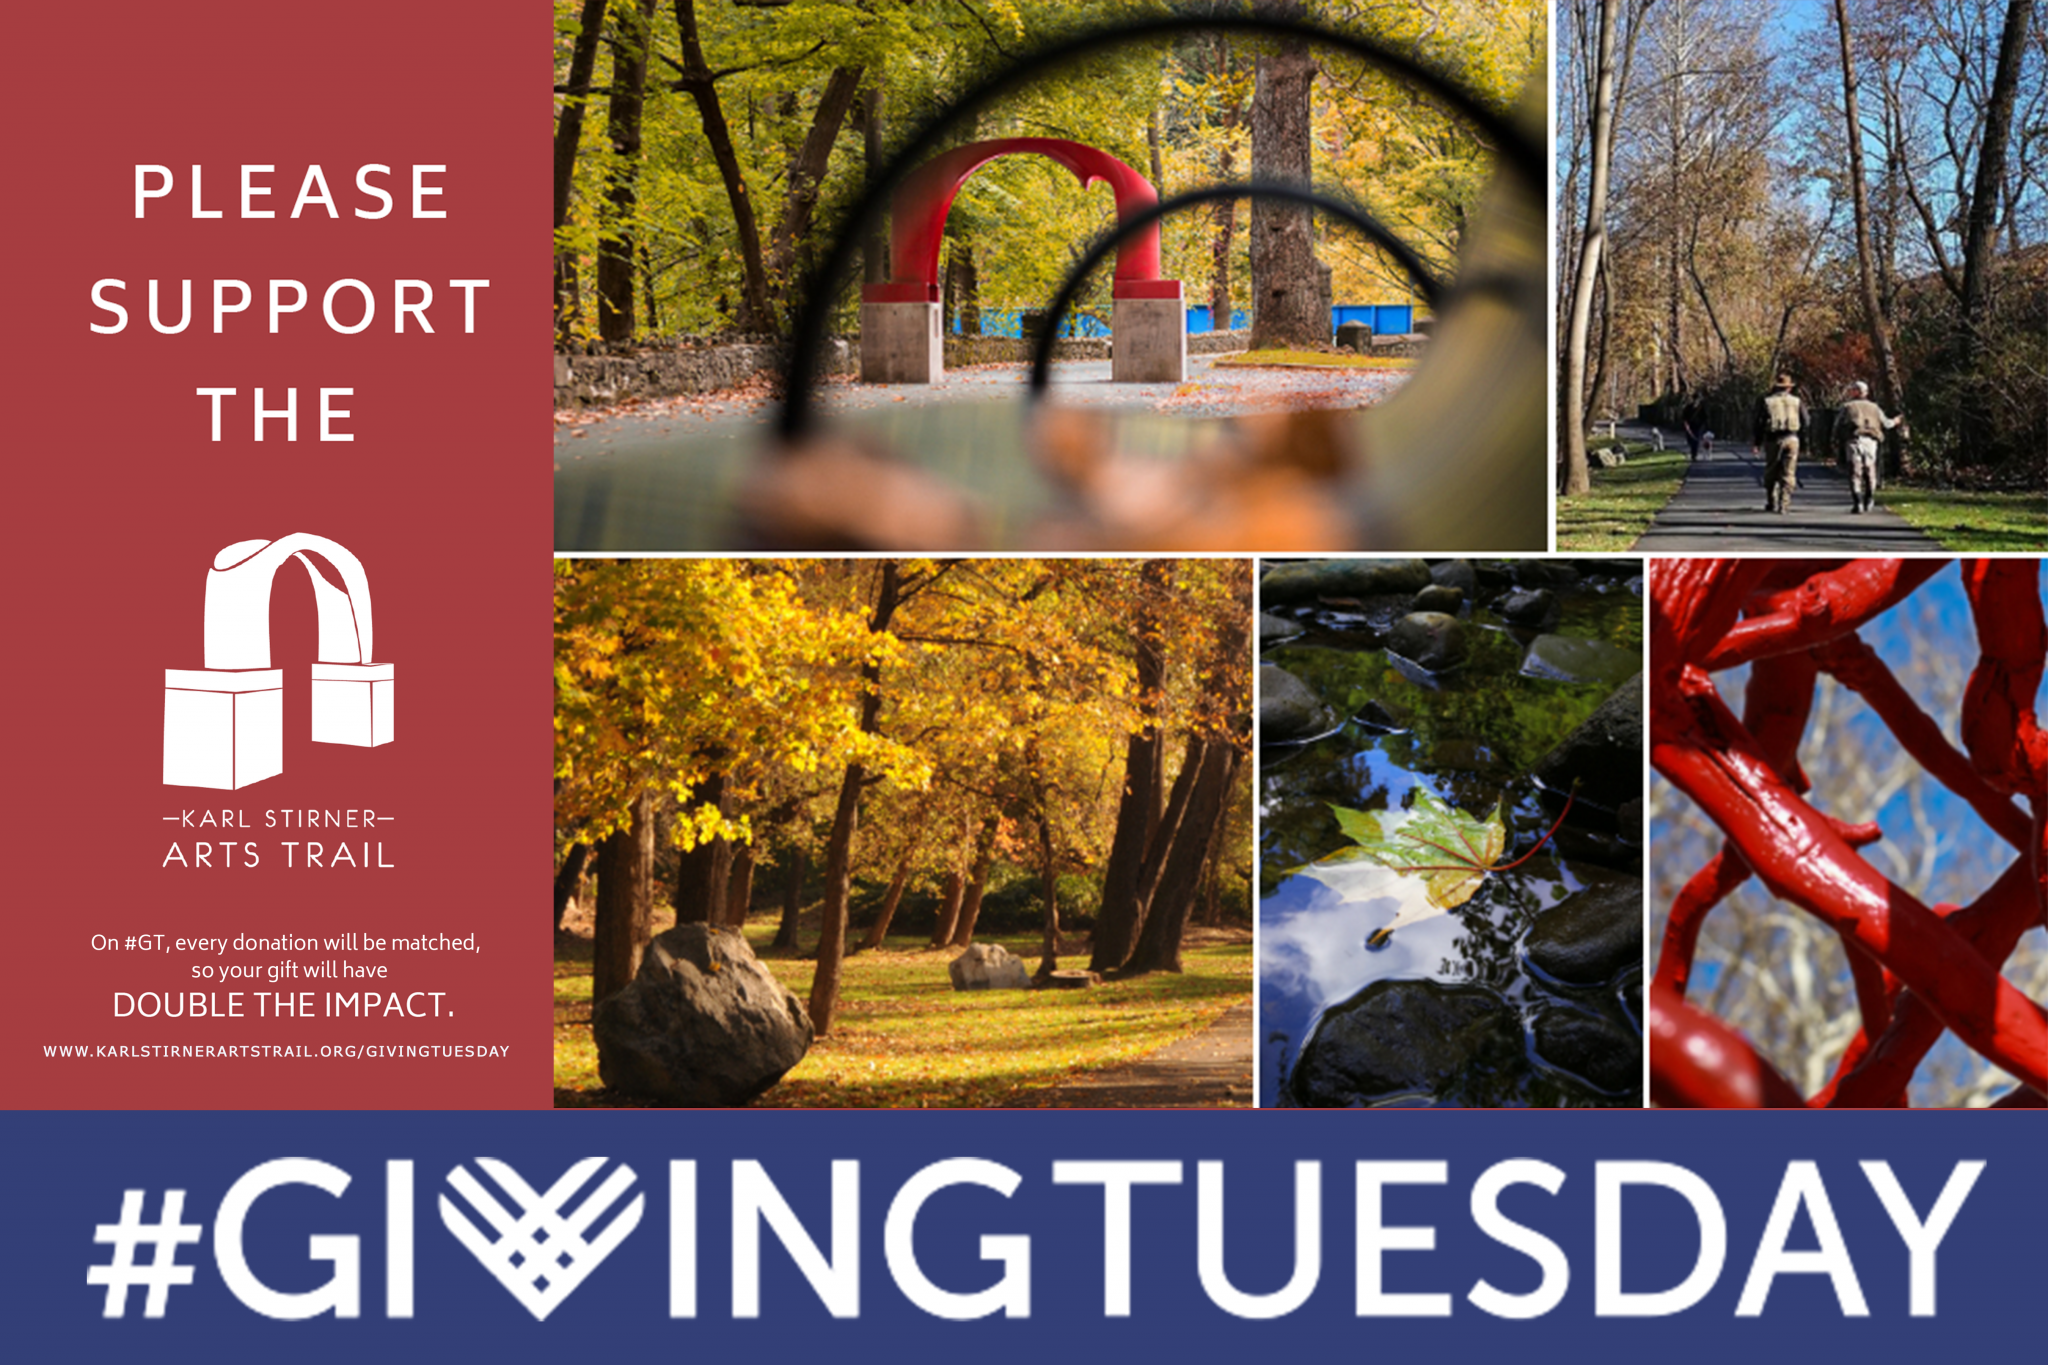 A collage of five scenes from the Karl Stirner Arts Trail in Easton, Pennsylvania, along with the hashtag #GivingTuesday